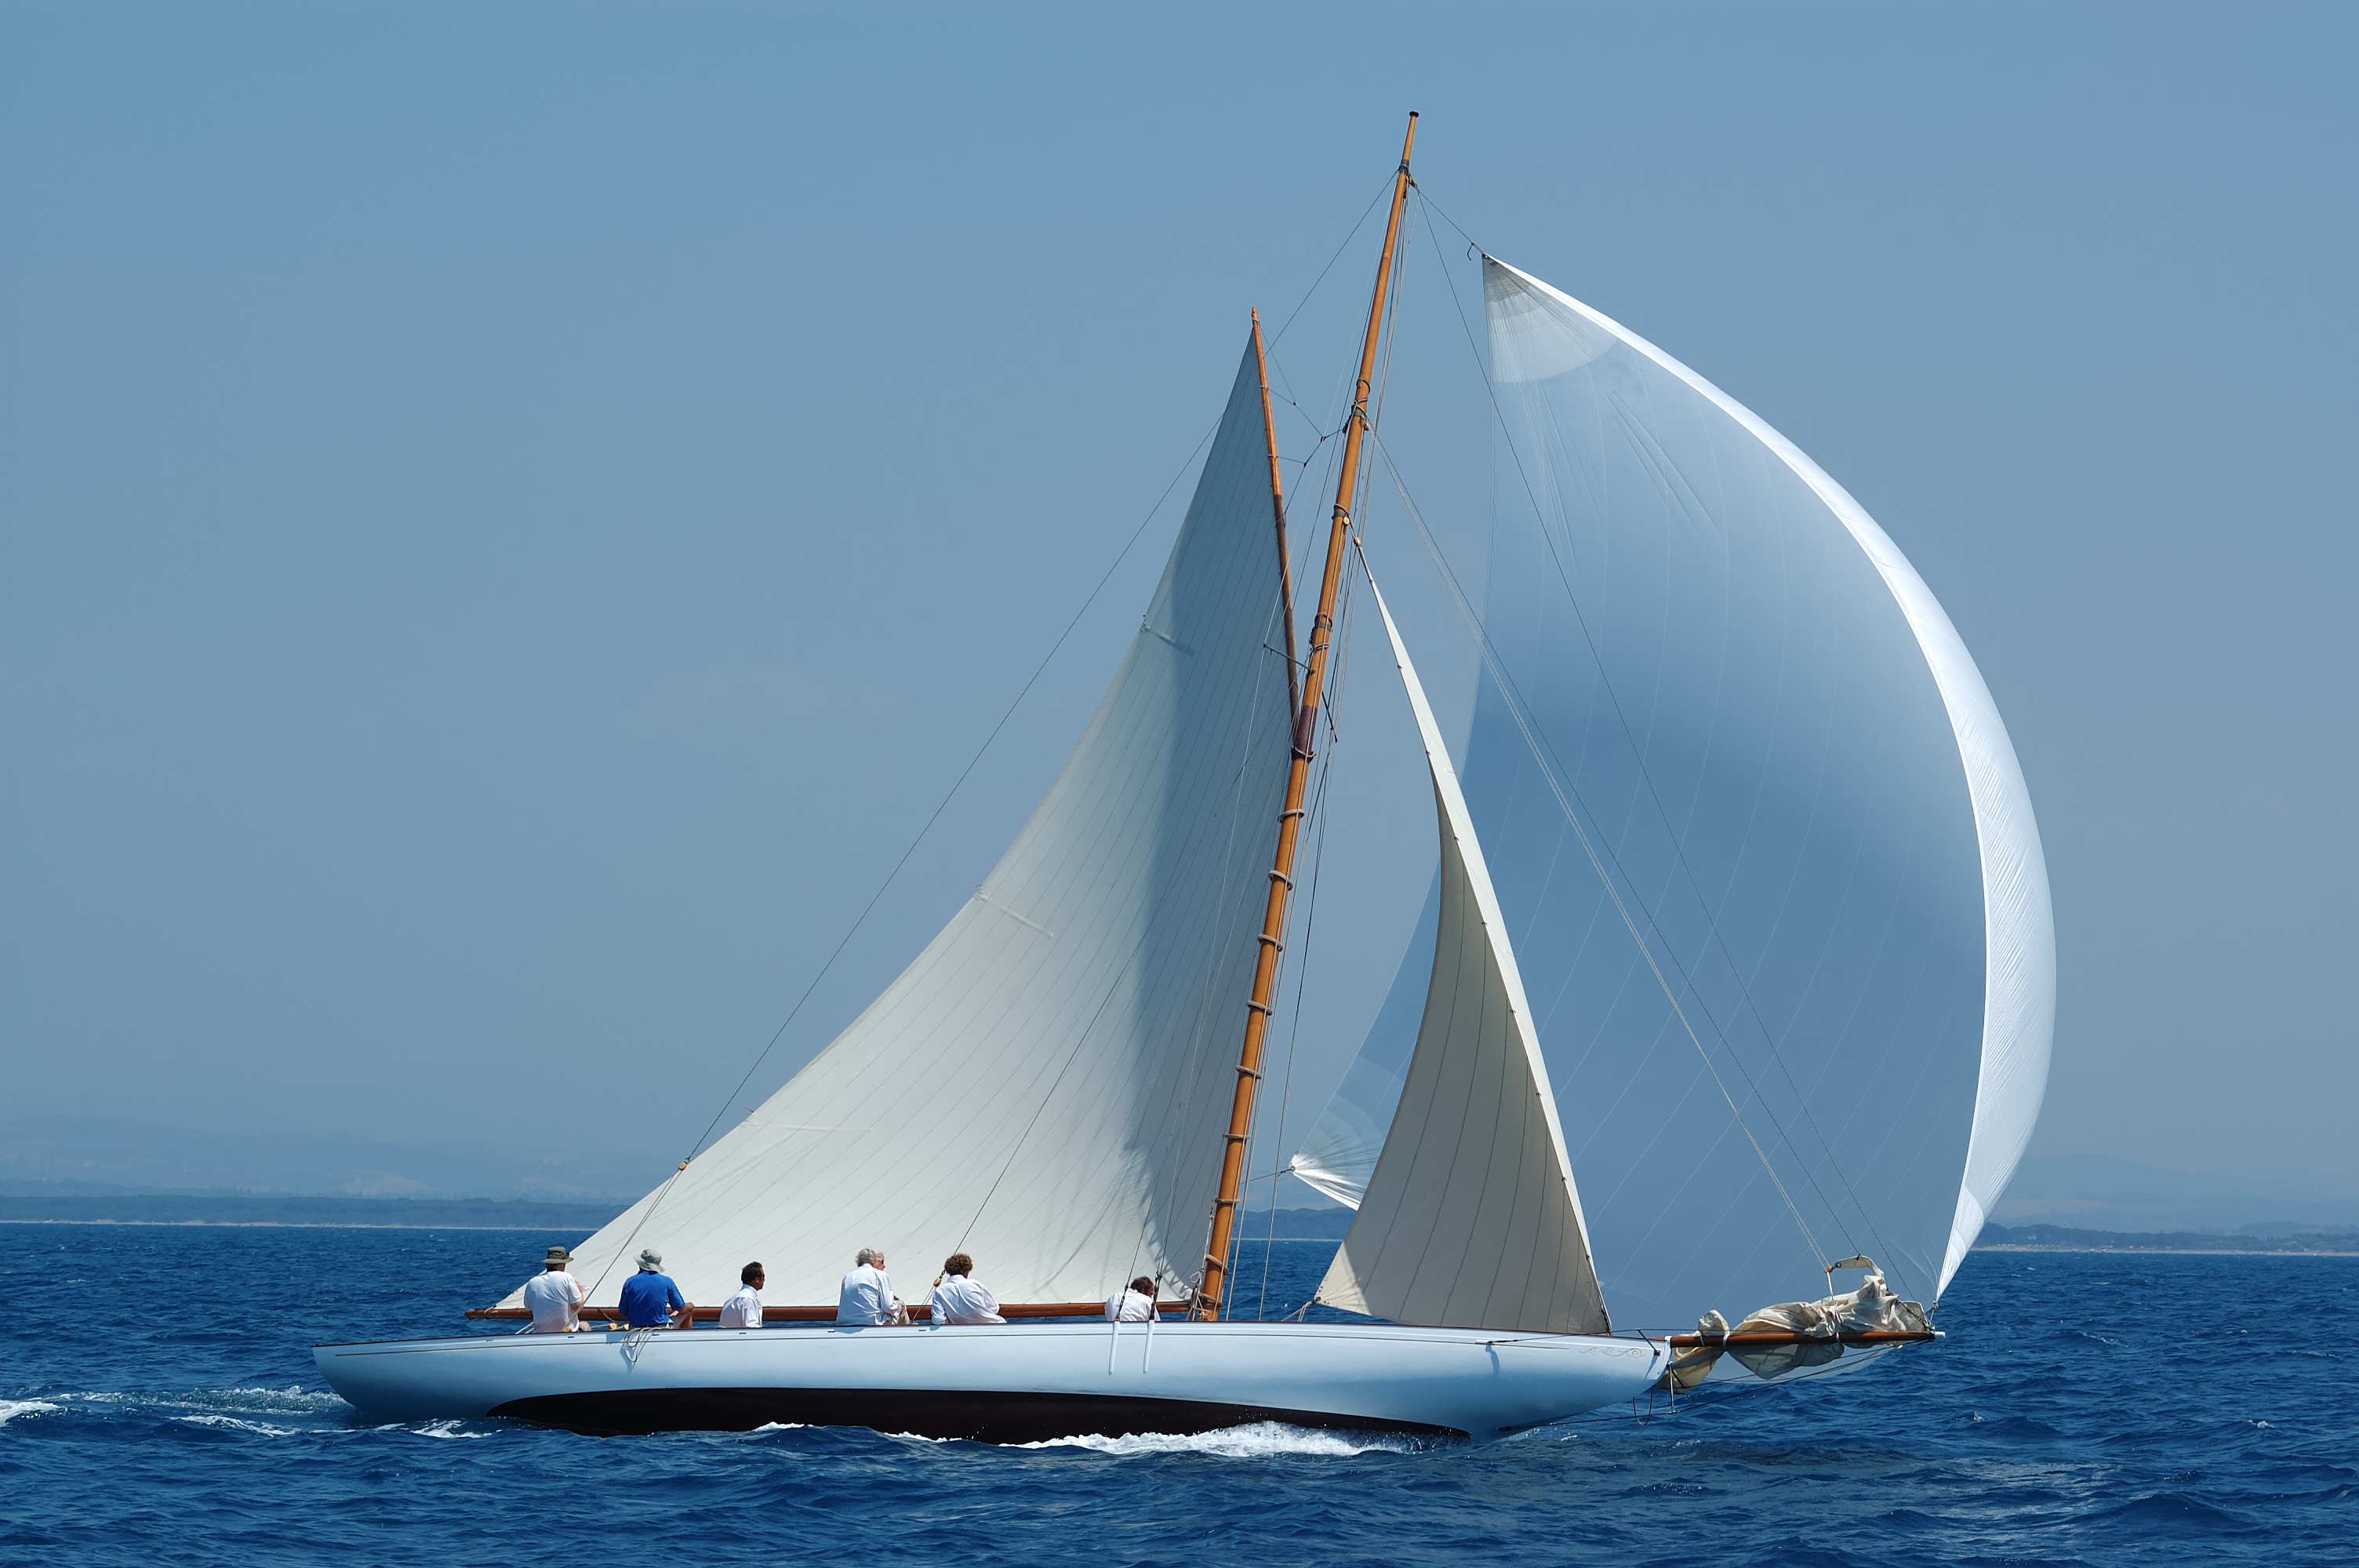 A sailing vessel used to symbolise how CRM can put the wind in your business' sales